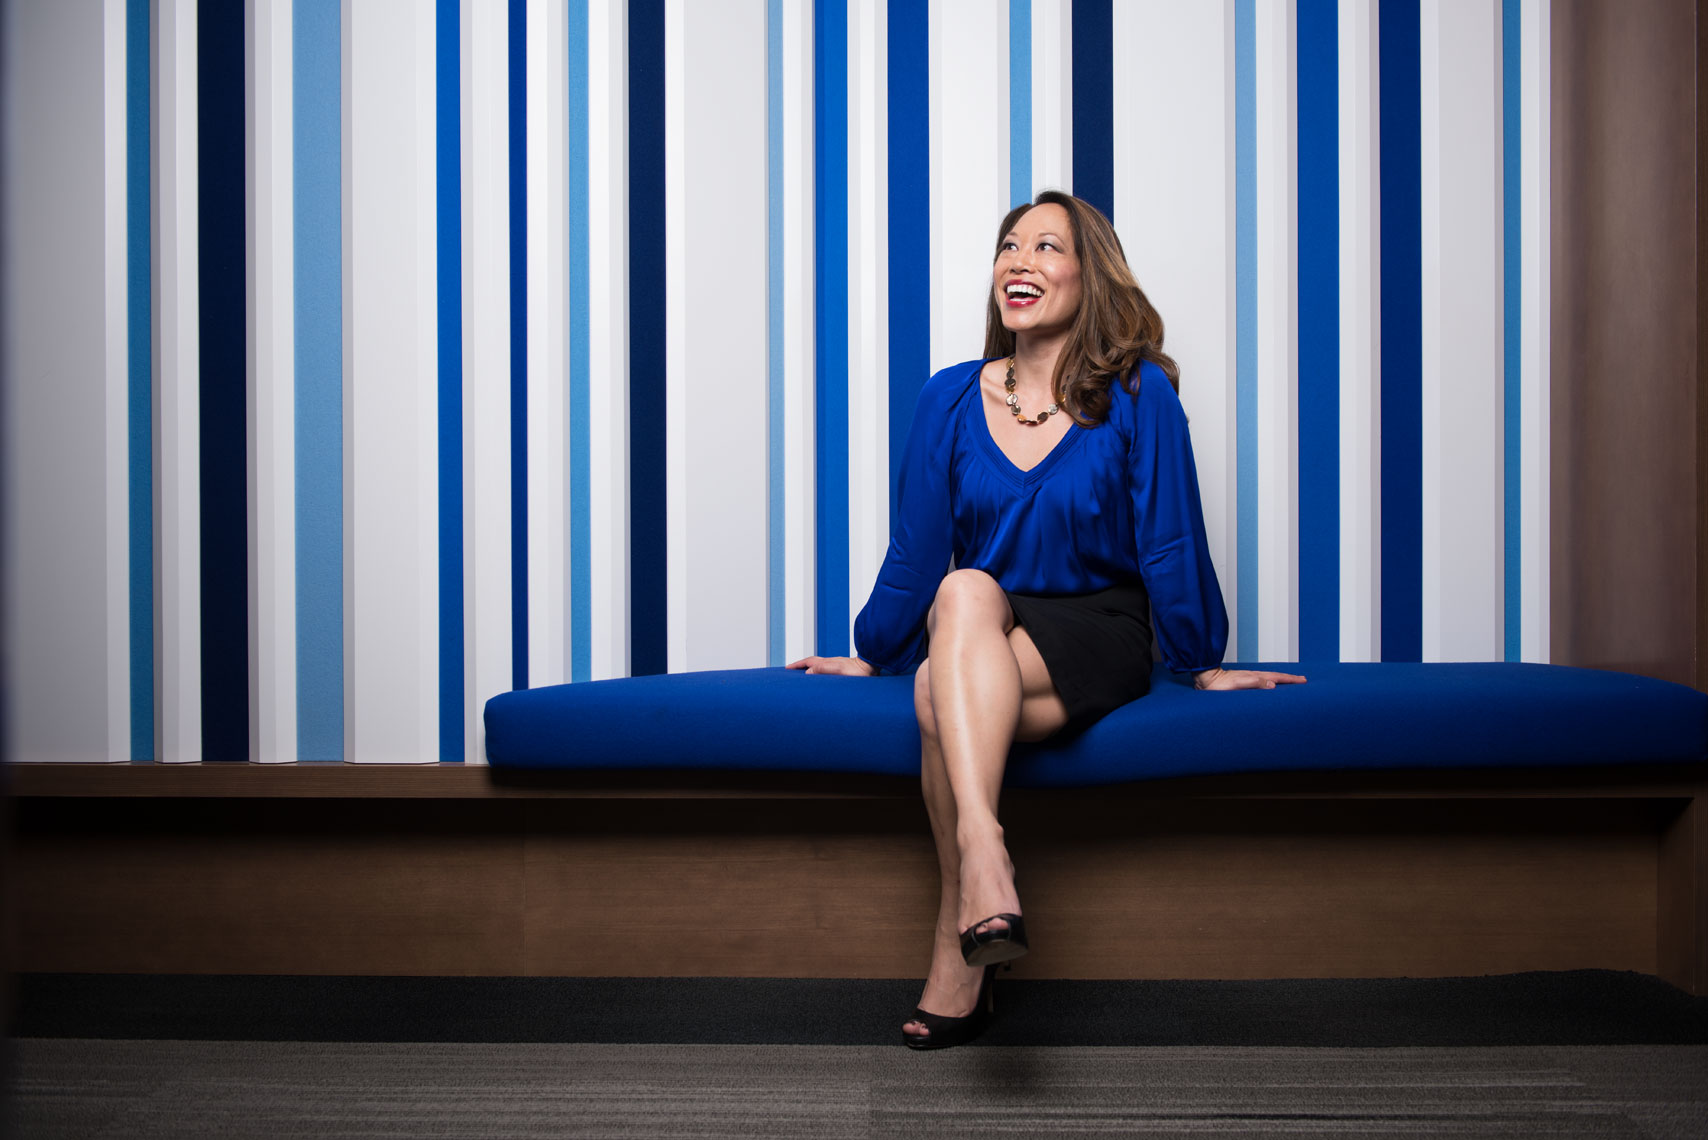 Ailsa Chang seated on a blue bench at NPR headquarters